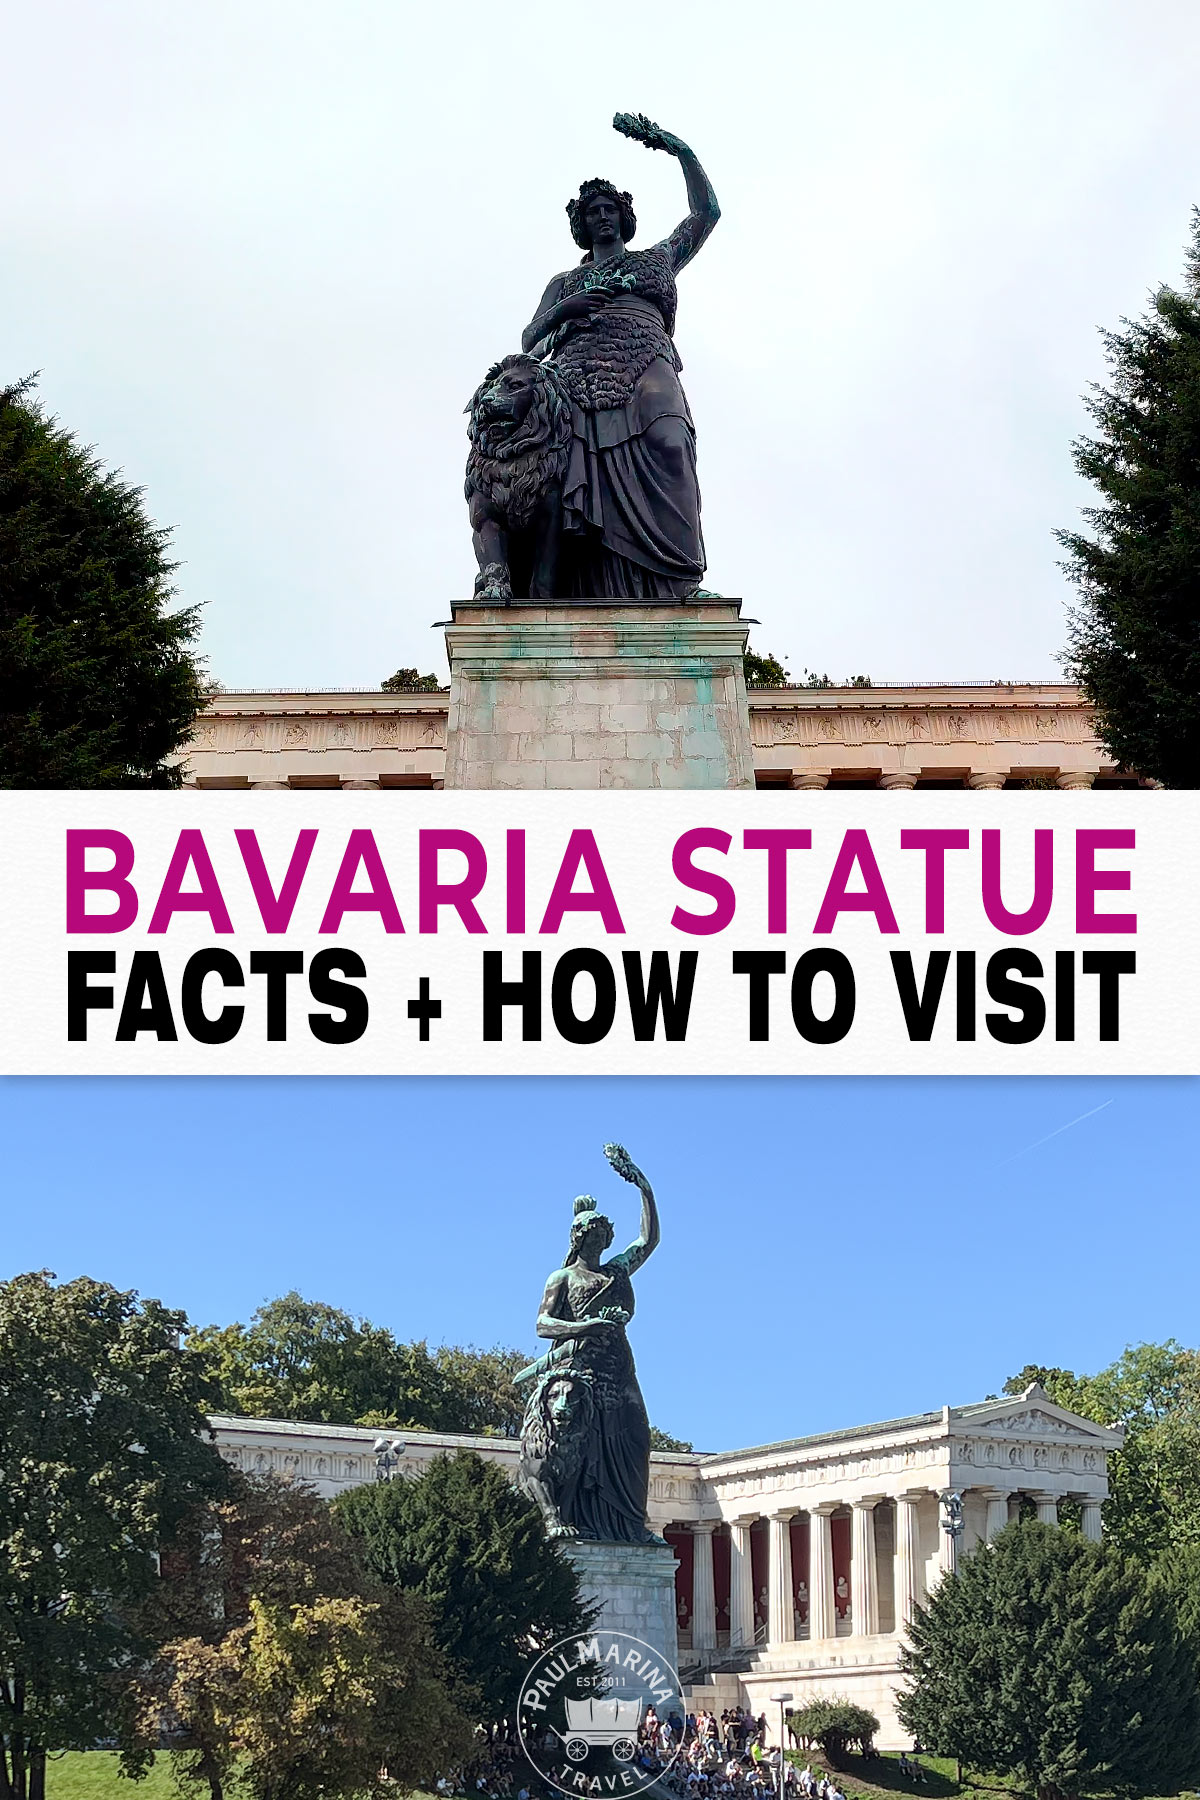 Lady Bavaria Statue in Munich: Facts and How to Visit pin image